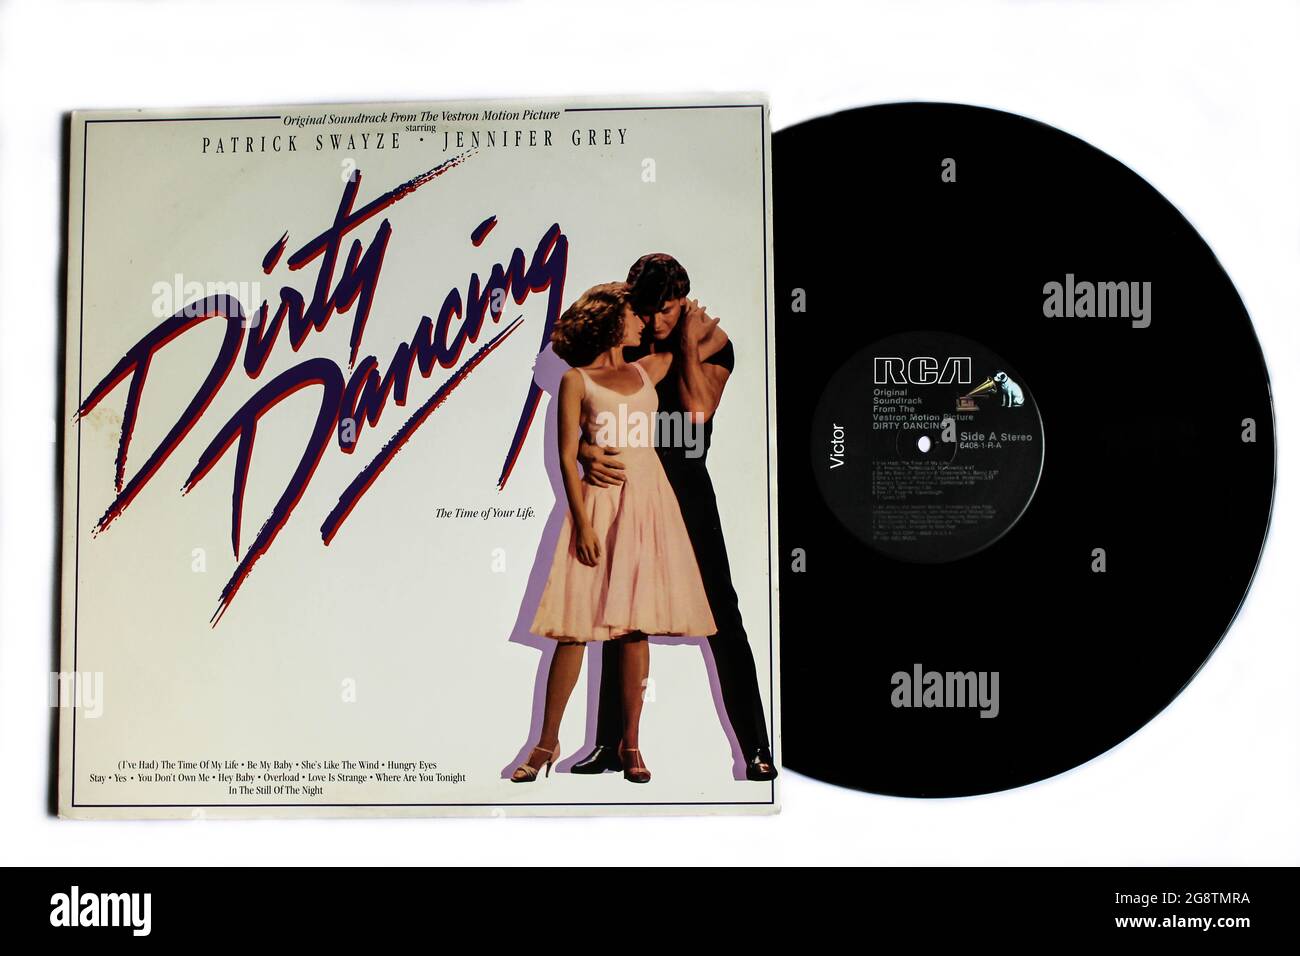 Dirty Dancing: Original Soundtrack from the Vestron Motion Picture. Music album on vinyl record LP disc. Album cover Stock Photo